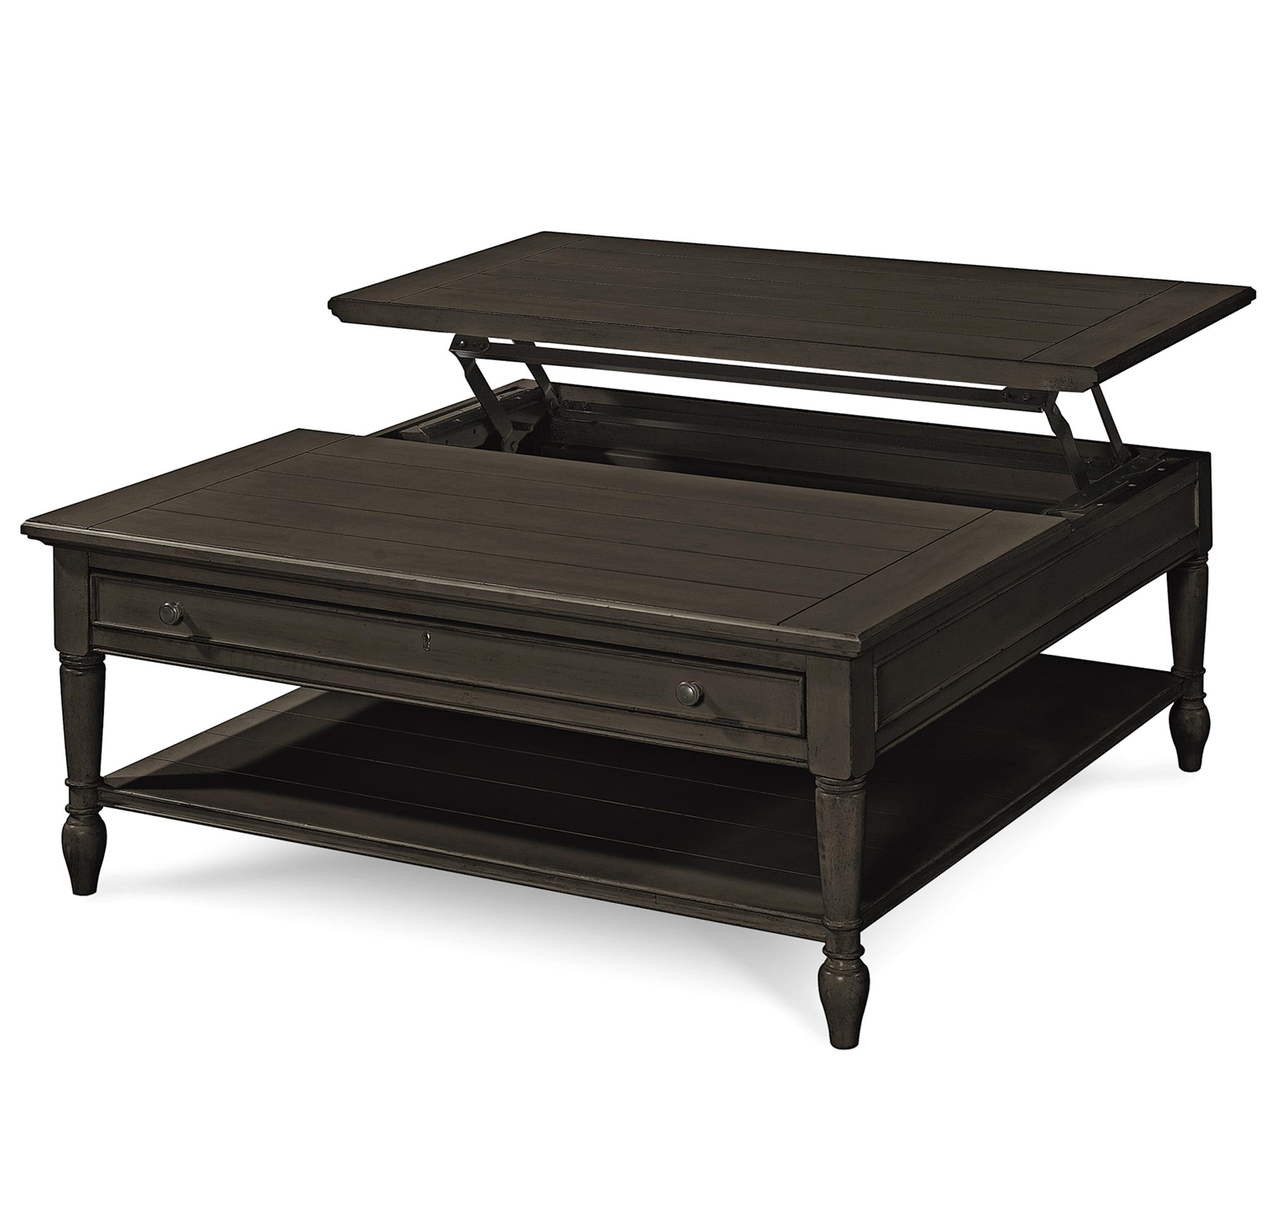 Country Chic Black Wood Square Coffee Table With Lift Top Zin Home